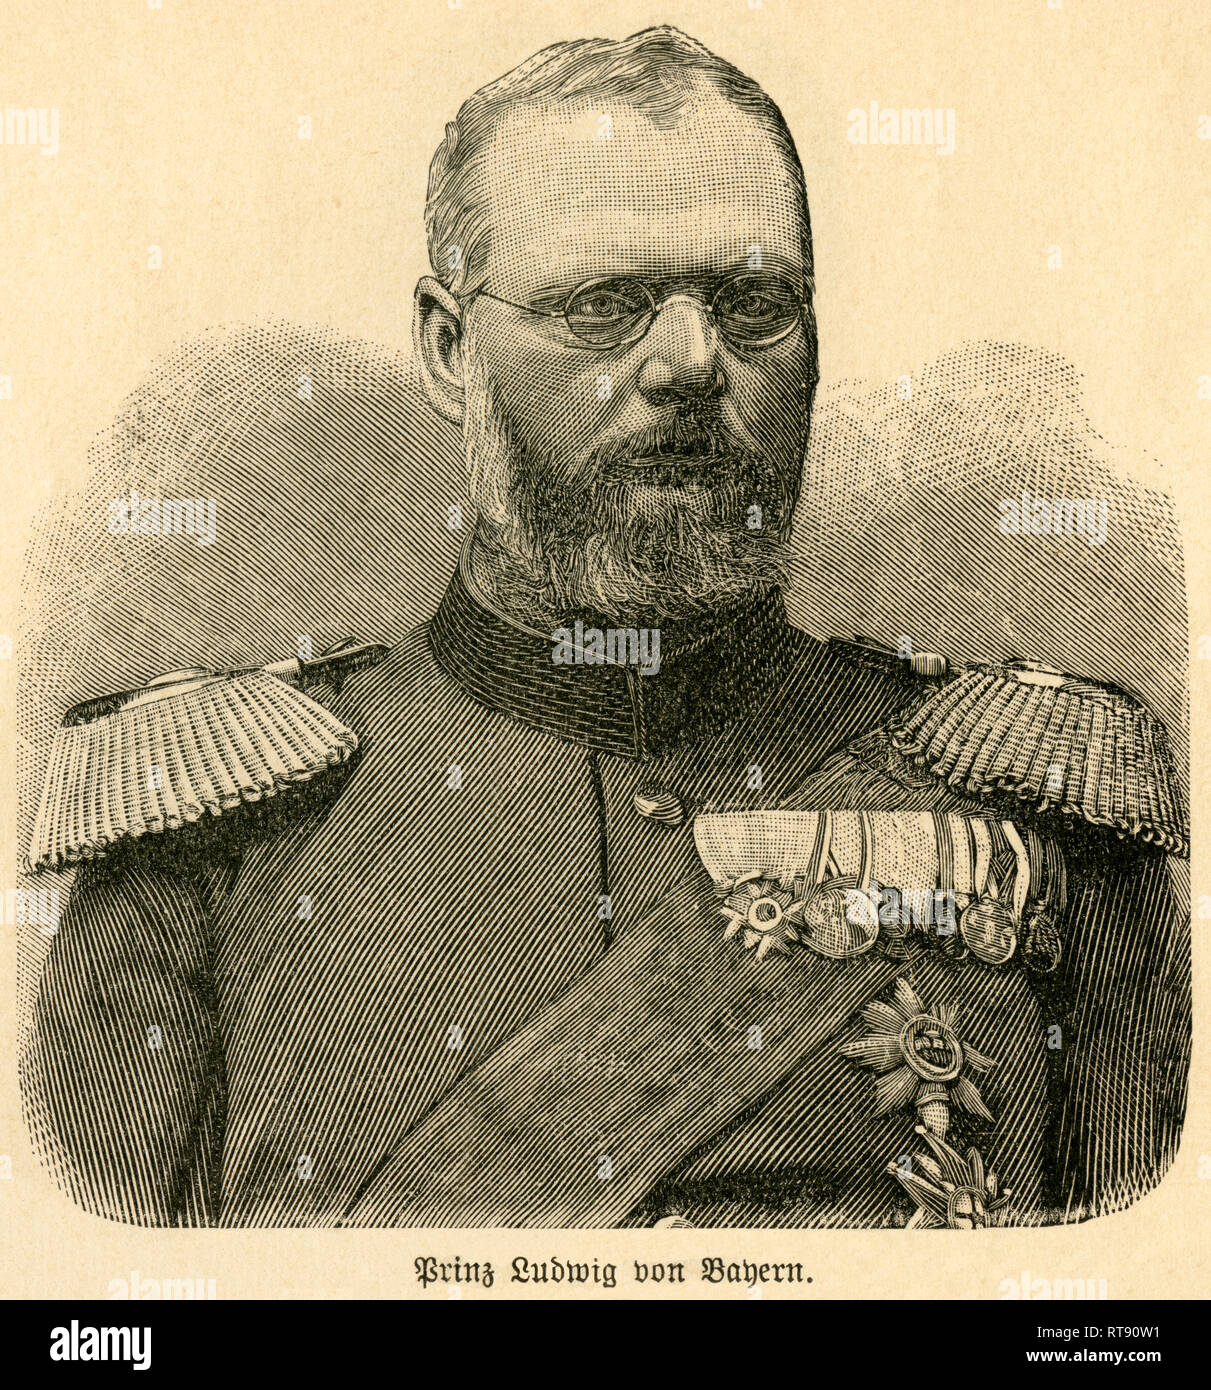 Prince Ludwig of Bavaria (later Ludwig III), portrait from: 'Deutsche Heerführer' (German military leader), portrayed by Sprößer, publishing house Ferdinand Hirt and son, Leipzig, 1895., Additional-Rights-Clearance-Info-Not-Available Stock Photo